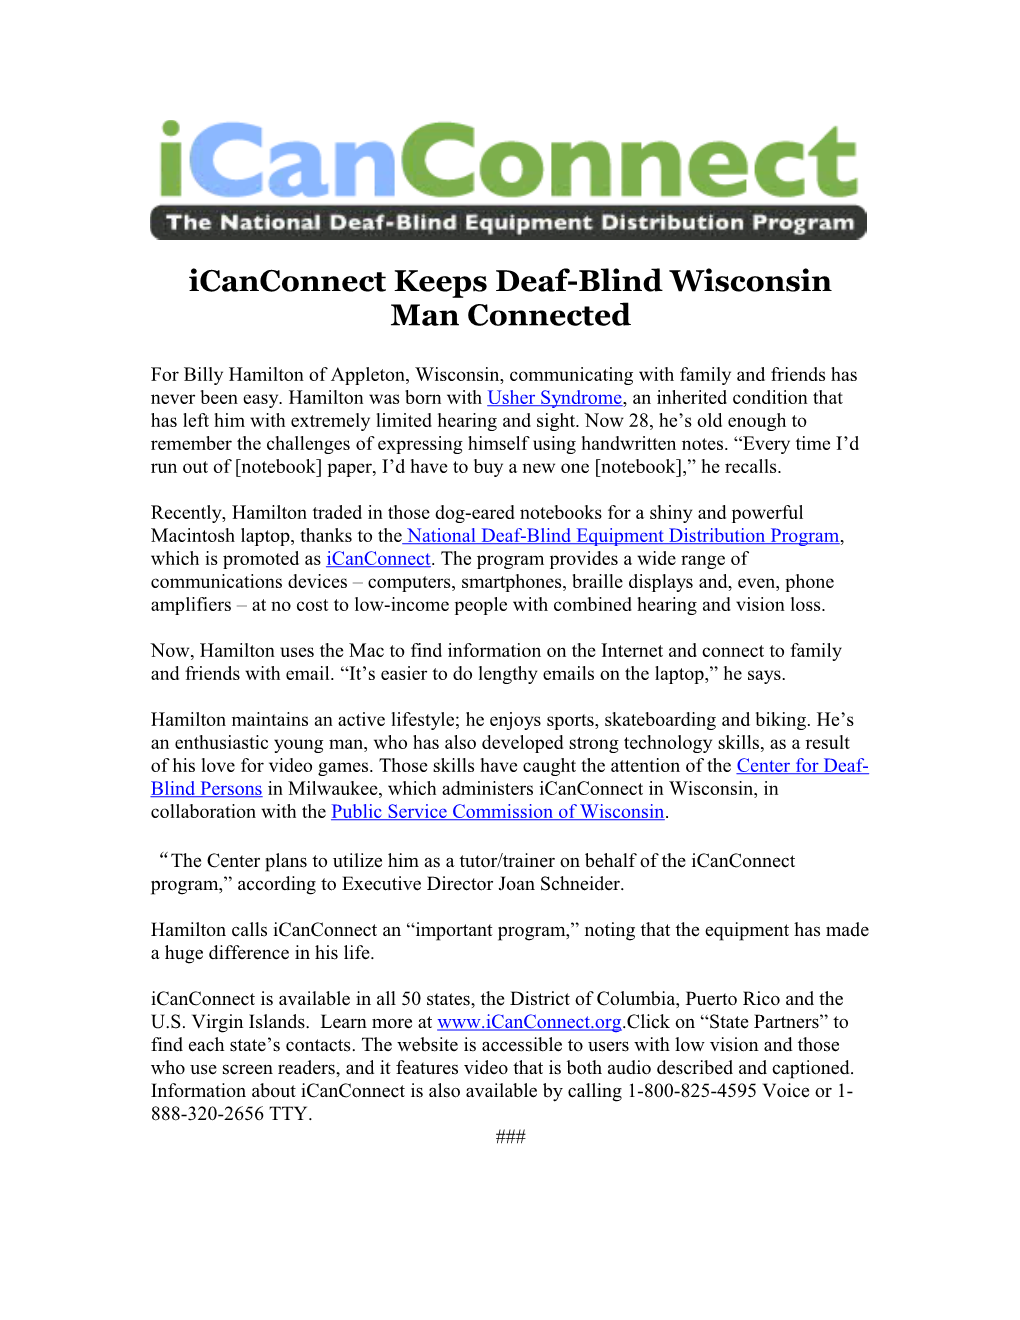 Icanconnect Keeps Deaf-Blind Wisconsin Man Connected